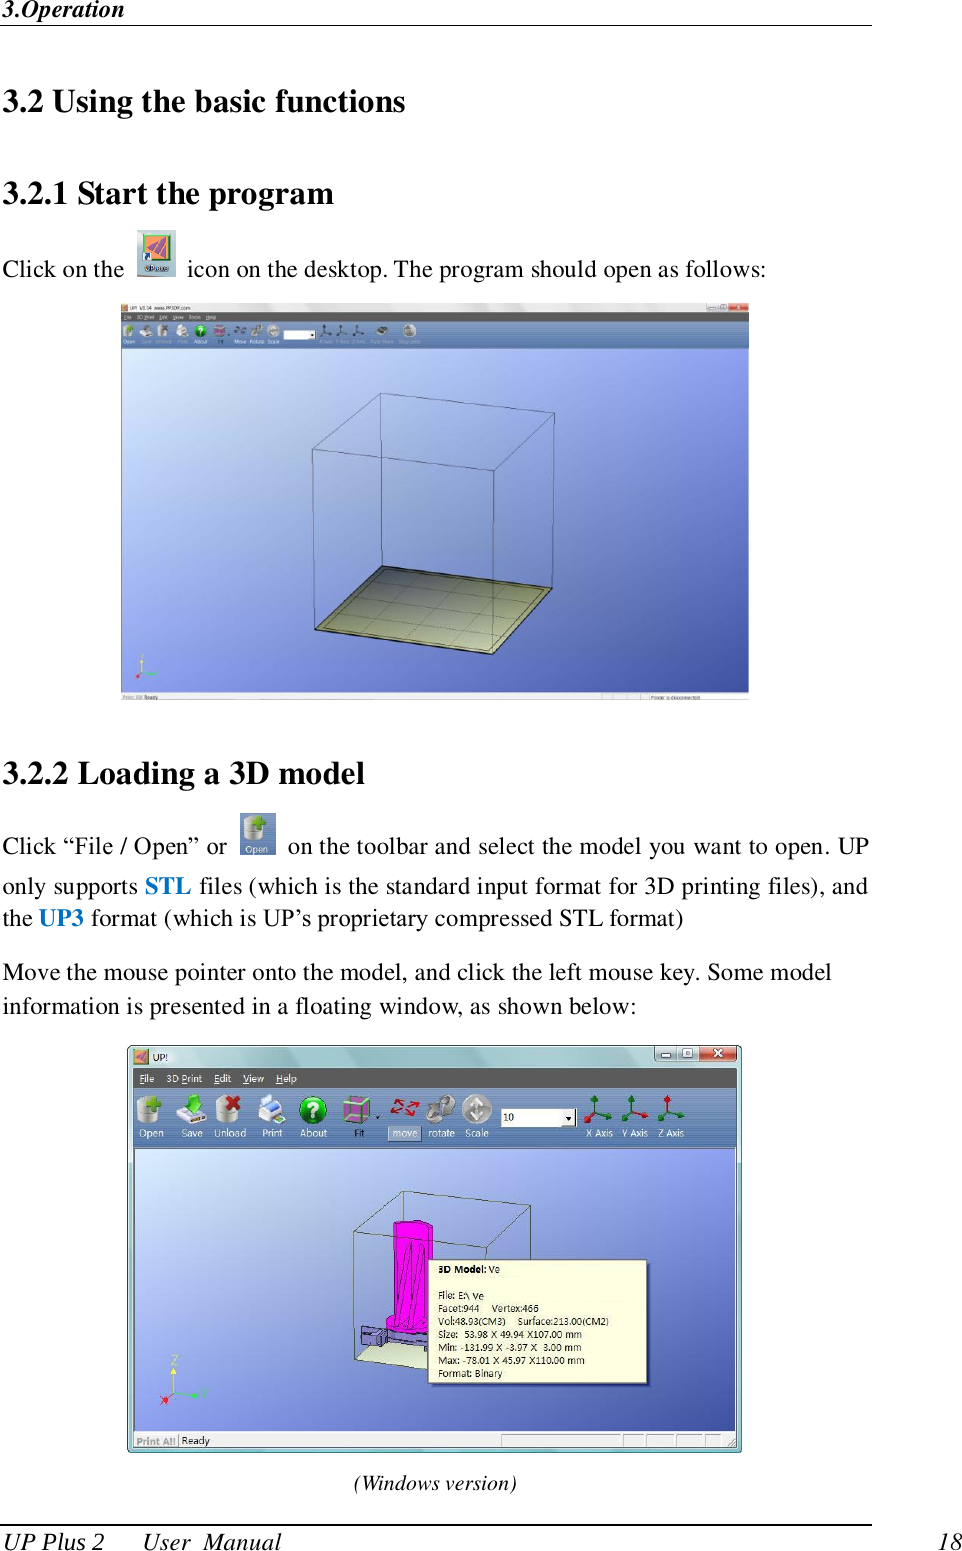 3.Operation UP Plus 2      User  Manual                                18 3.2 Using the basic functions 3.2.1 Start the program Click on the    icon on the desktop. The program should open as follows:  3.2.2 Loading a 3D model Click ―File / Open‖ or    on the toolbar and select the model you want to open. UP only supports STL files (which is the standard input format for 3D printing files), and the UP3 format (which is UP‘s proprietary compressed STL format) Move the mouse pointer onto the model, and click the left mouse key. Some model information is presented in a floating window, as shown below:  (Windows version) 